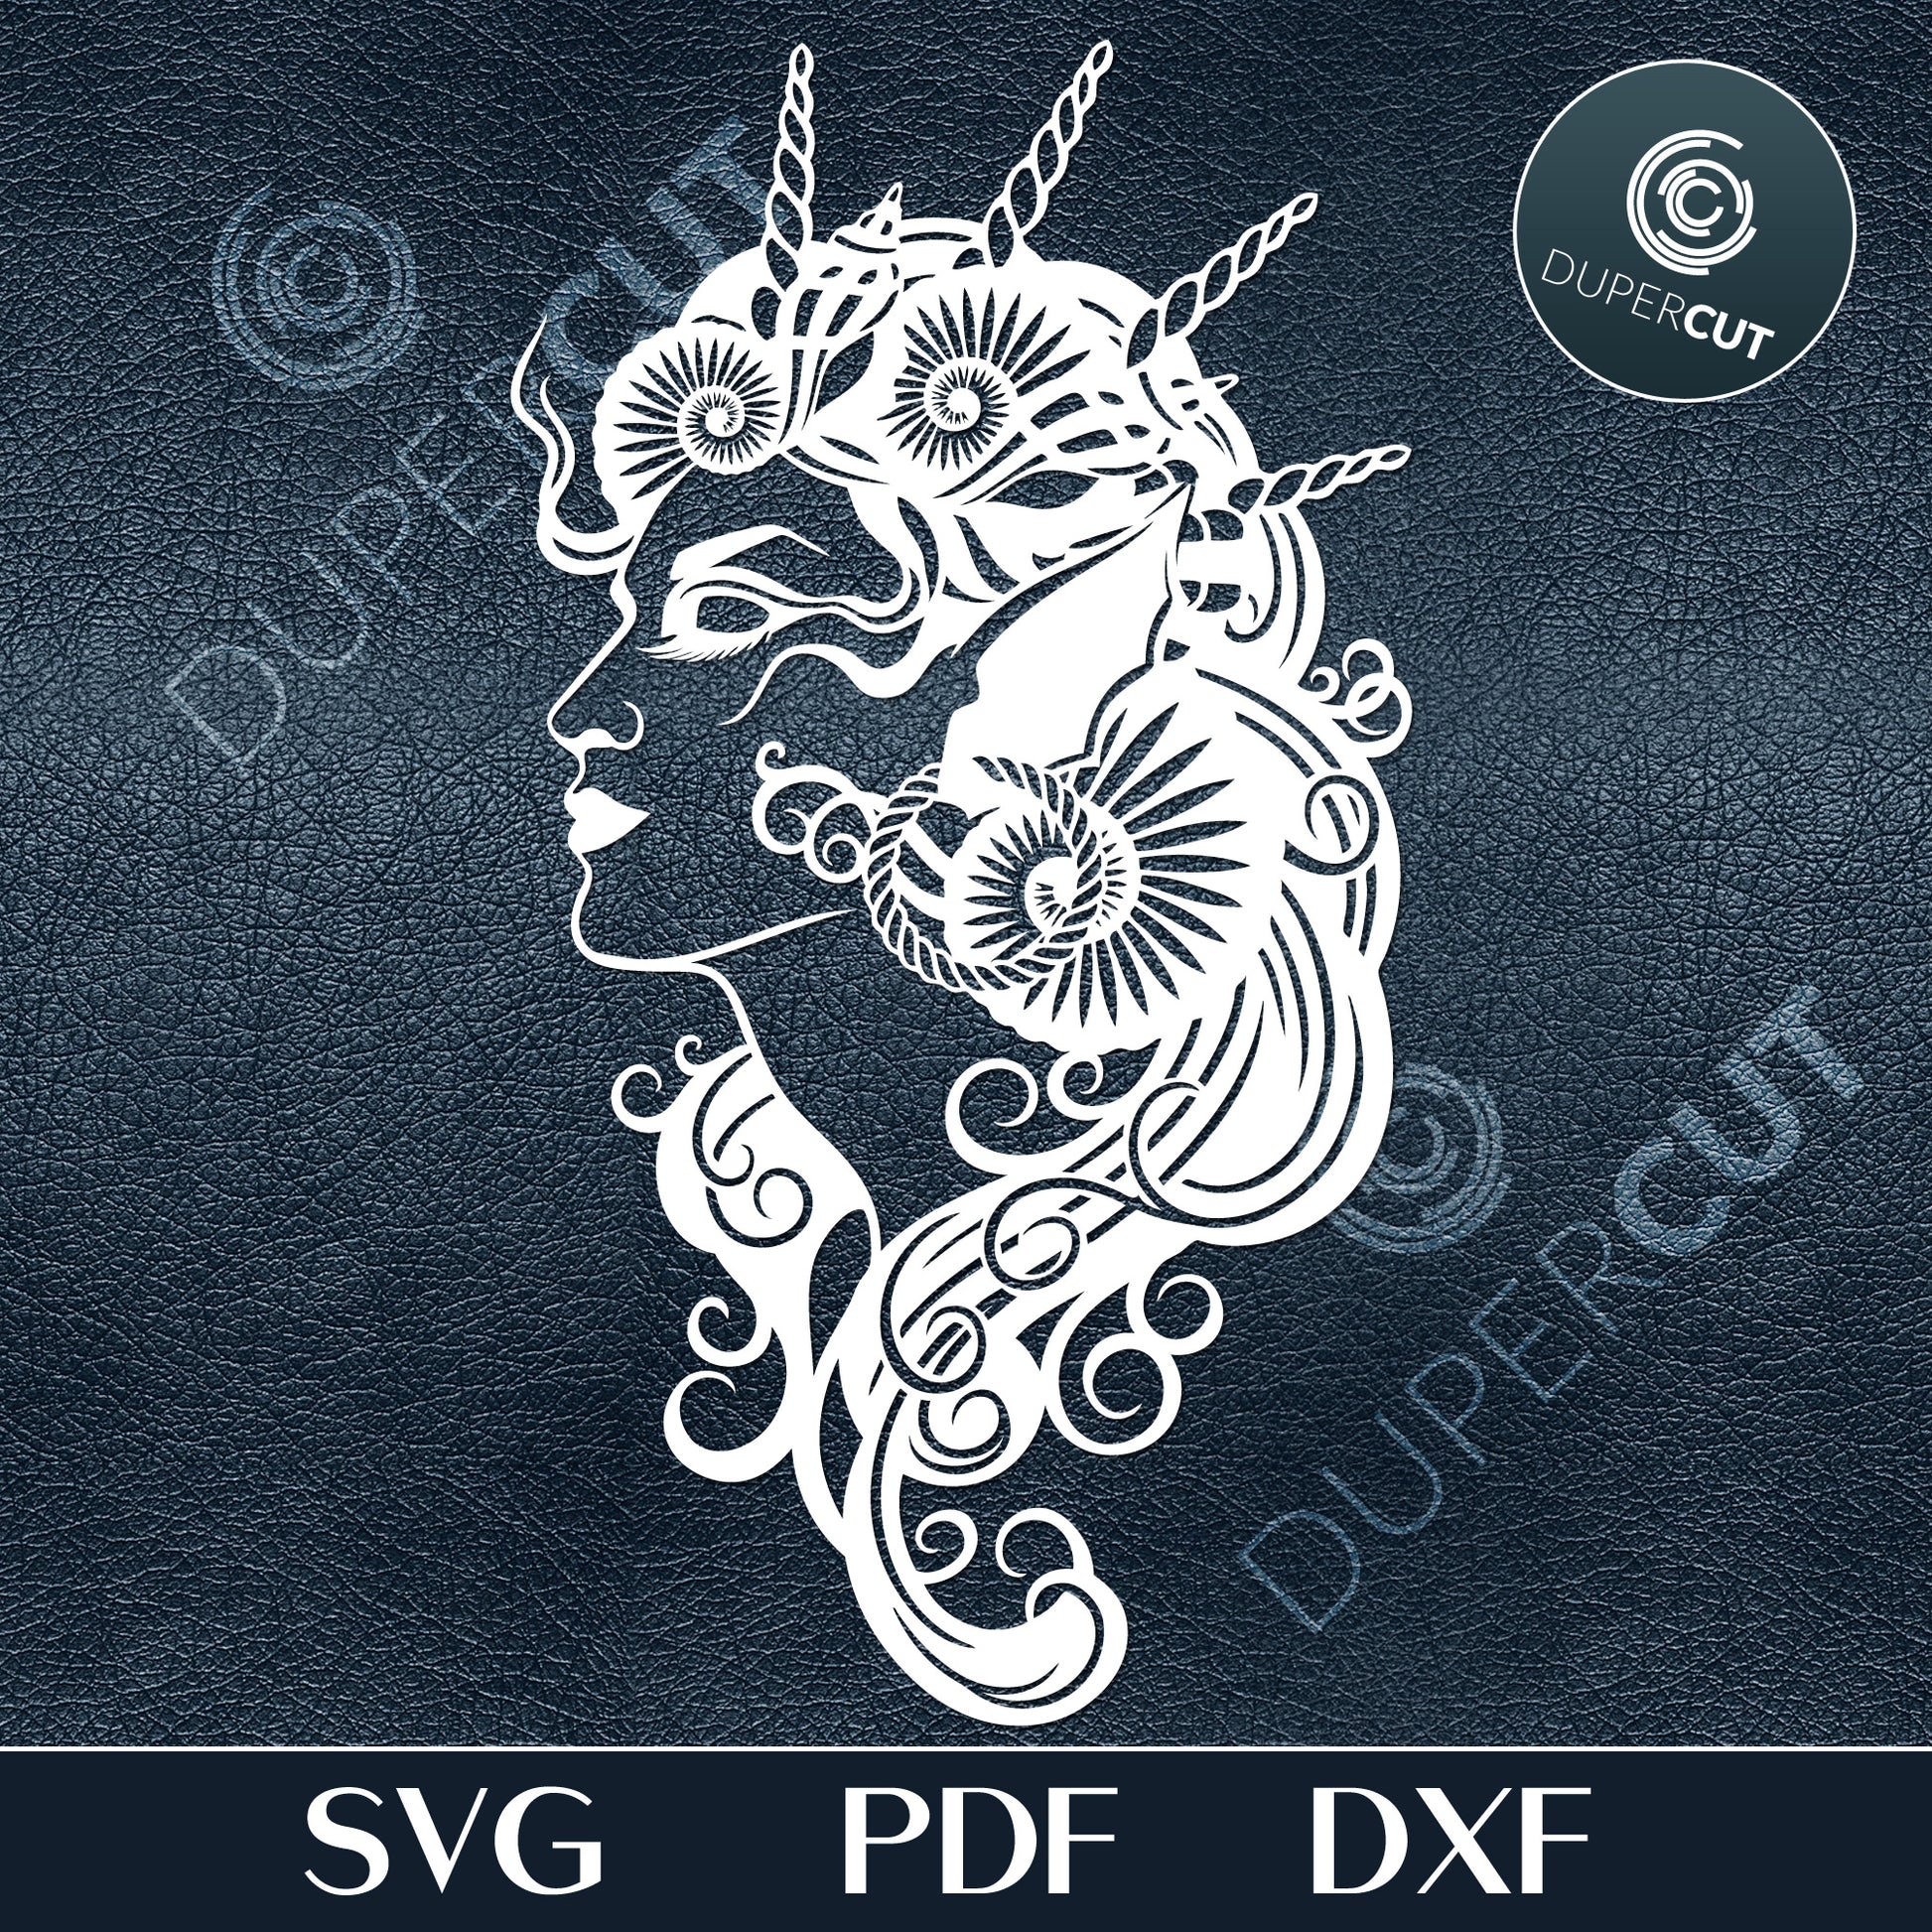 Mermaid woman with seashells, hand drawing tattoo style art. SVG PNG DXF cutting files for Cricut, Silhouette, Glowforge, print on demand, sublimation templates